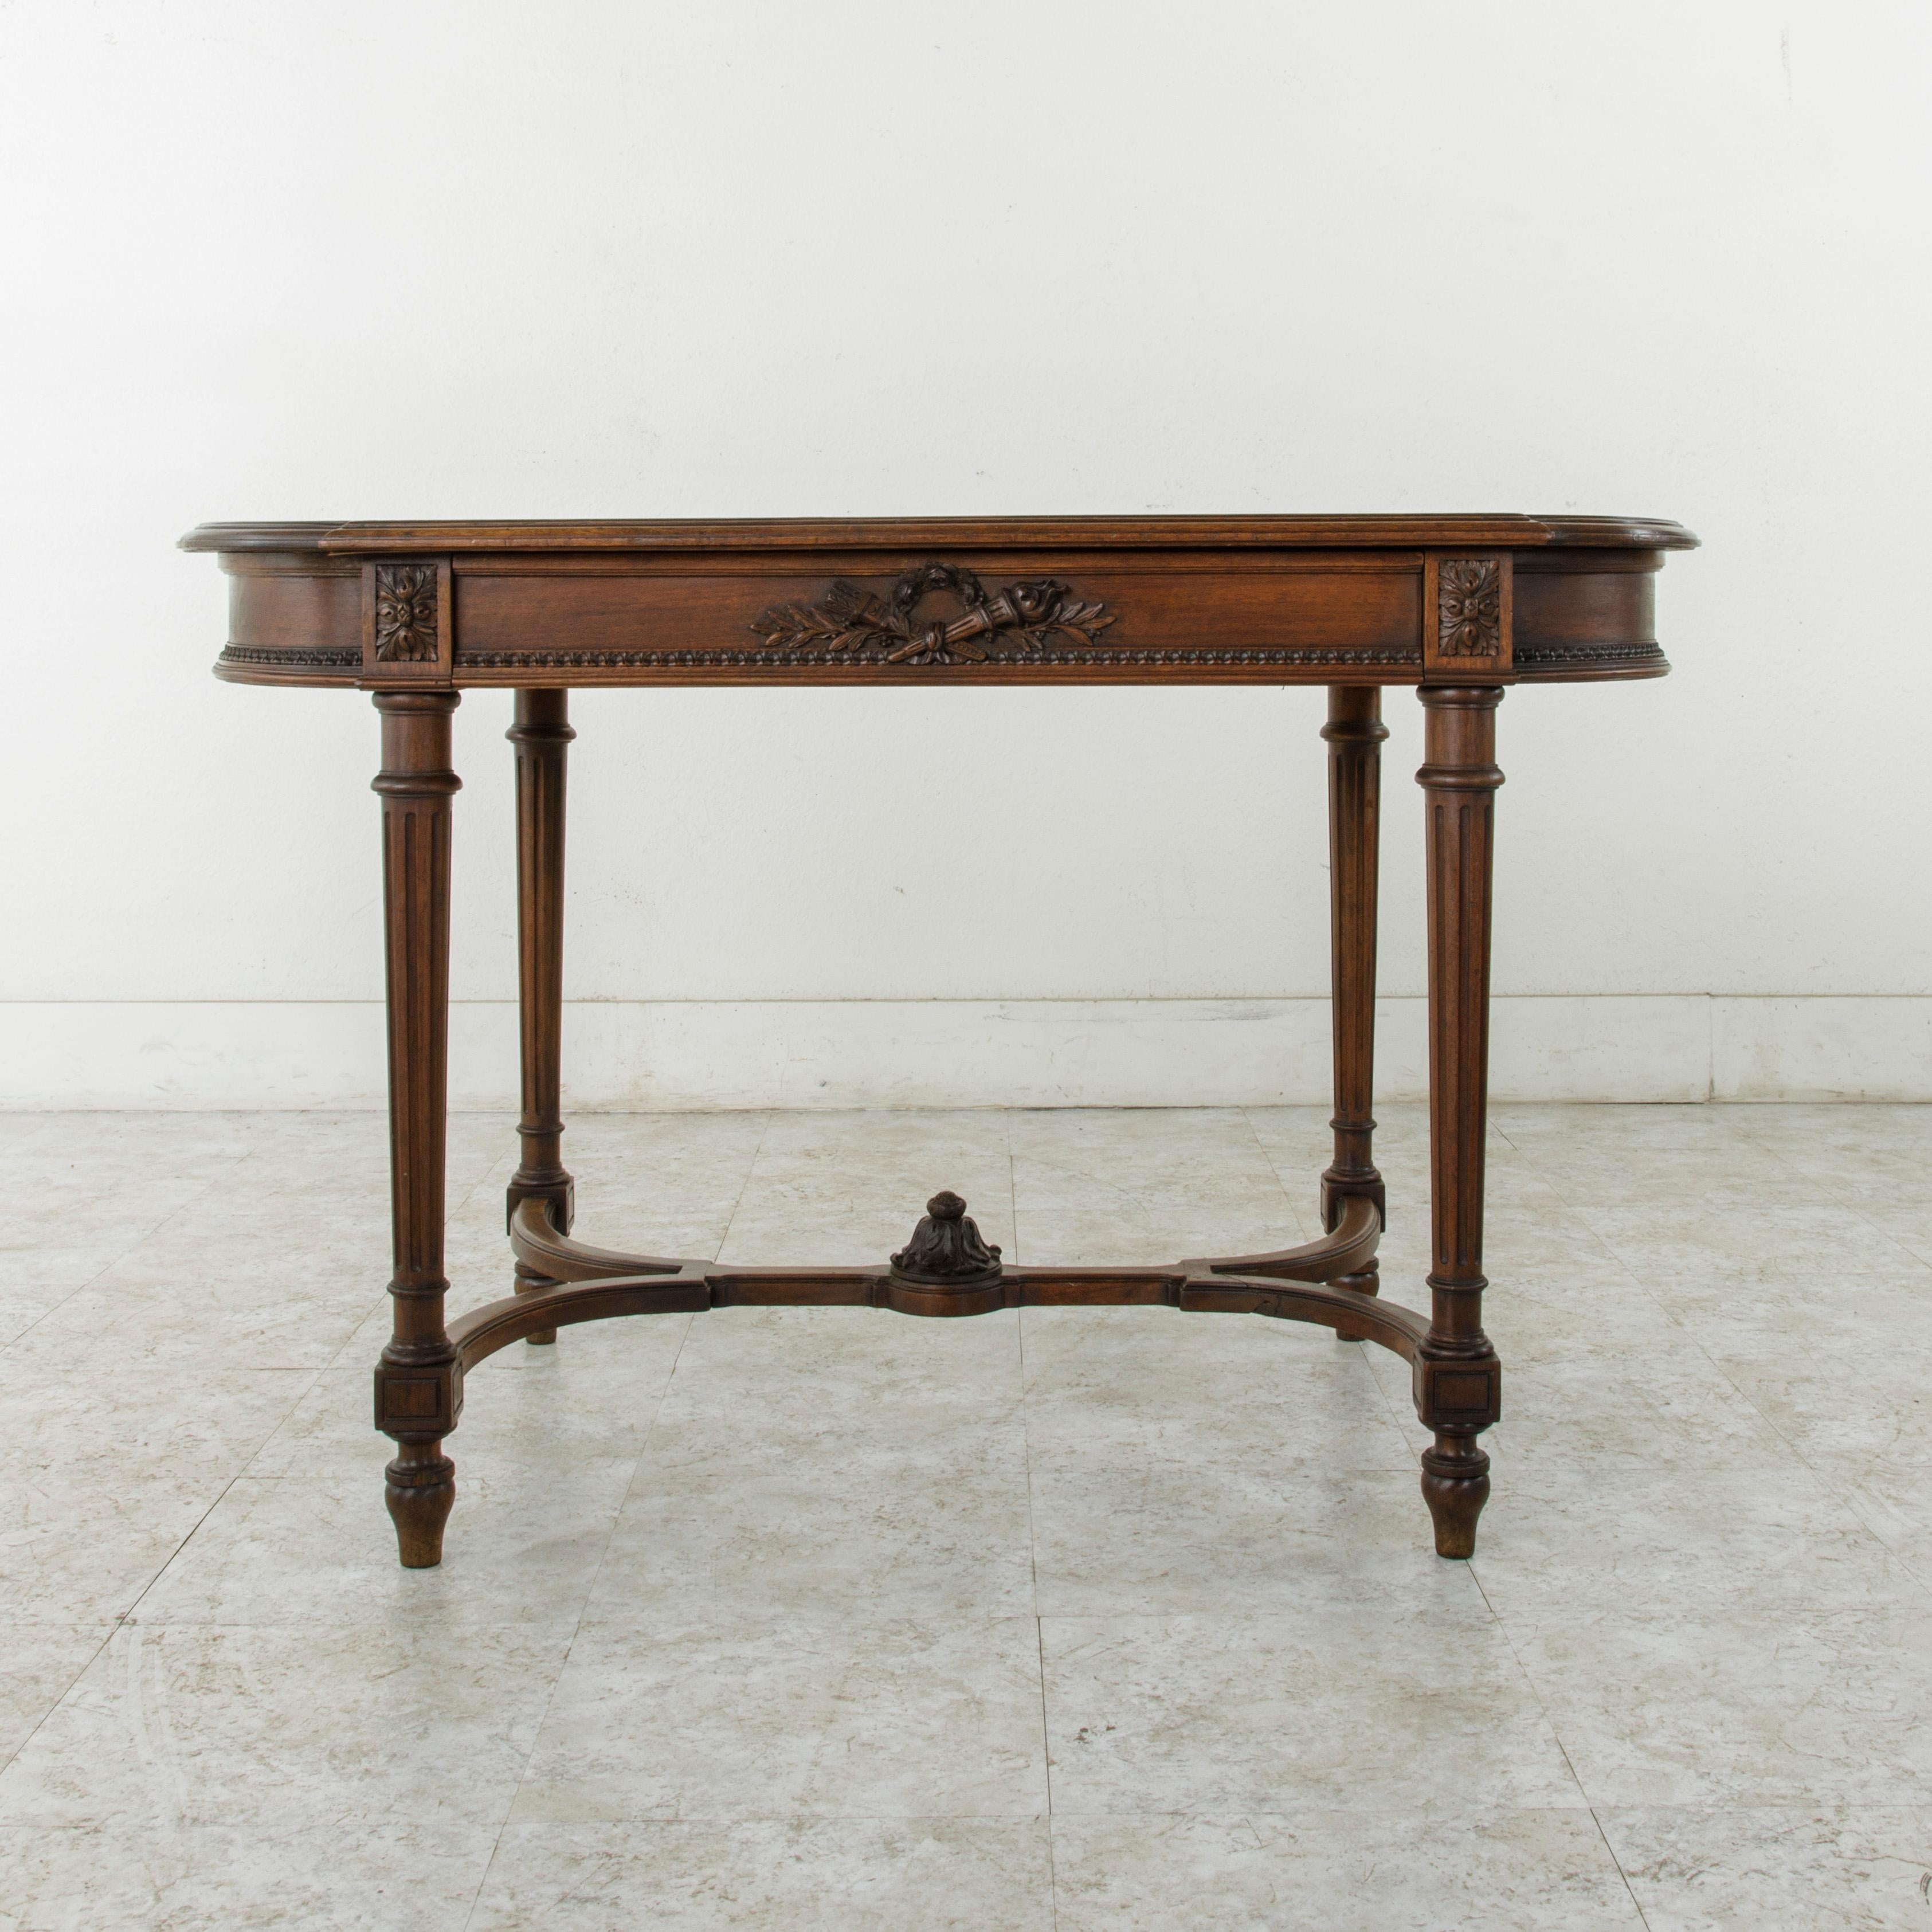 This Louis XVI style walnut writing table or desk from the late 19th century features hand carved detailing of a Classic crossed torch and quiver with laurels and a wreath of roses on two sides. Its beveled top is of oval form, and the apron below